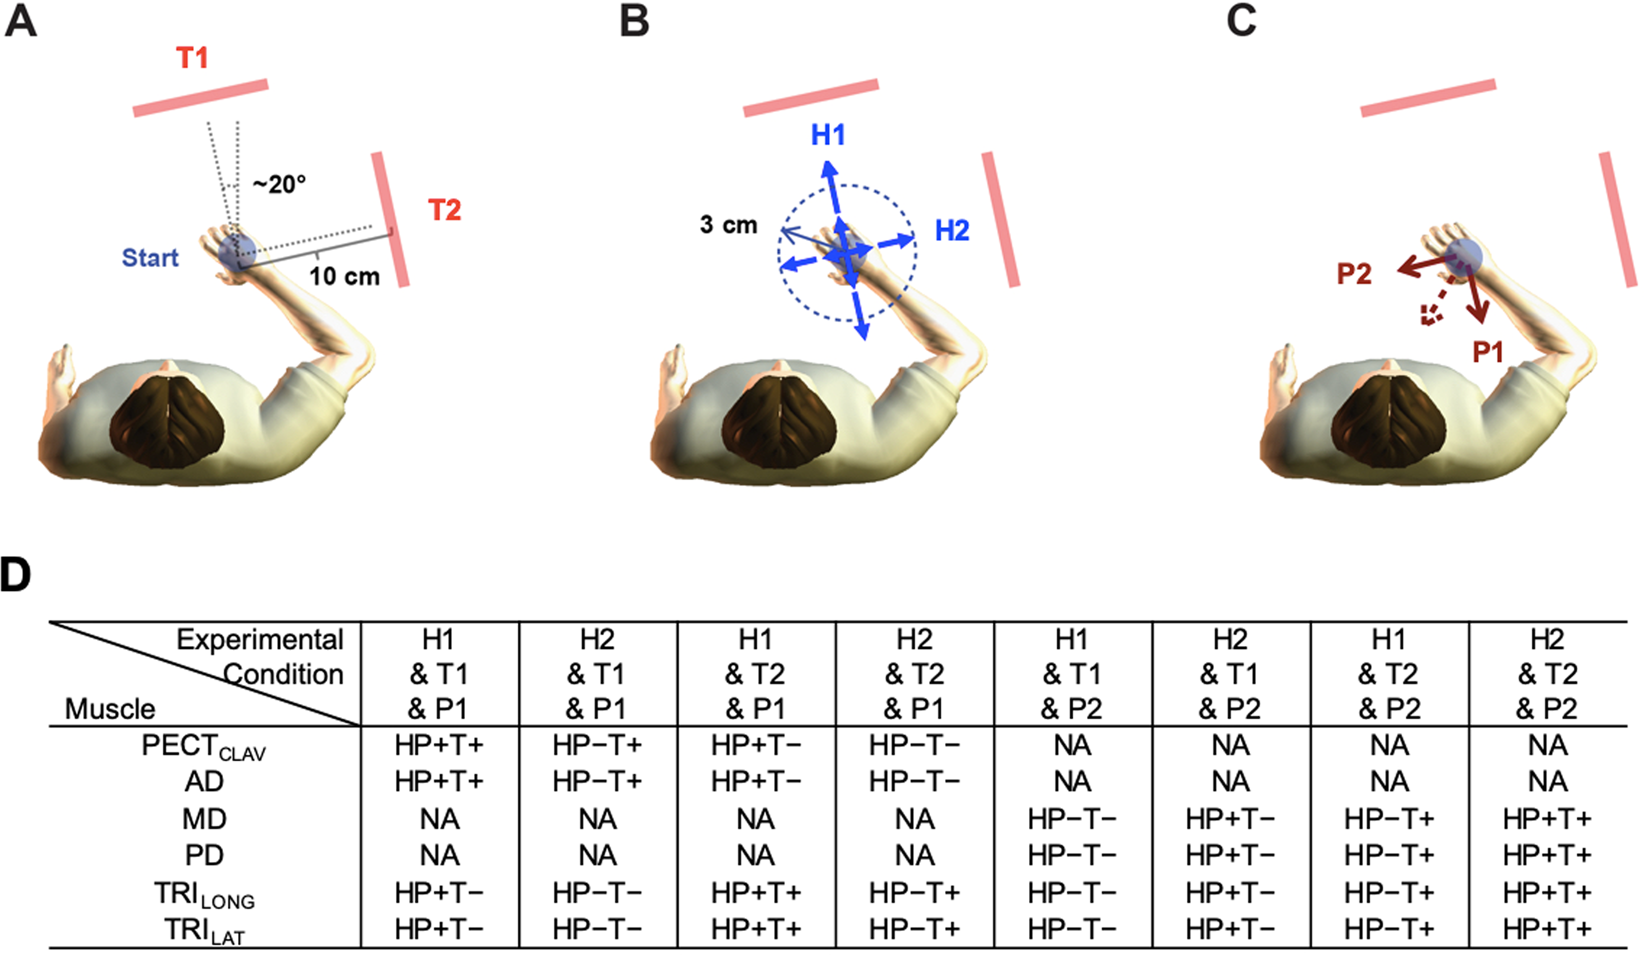 Stabilizing Stretch Reflexes Are Modulated Independently From The